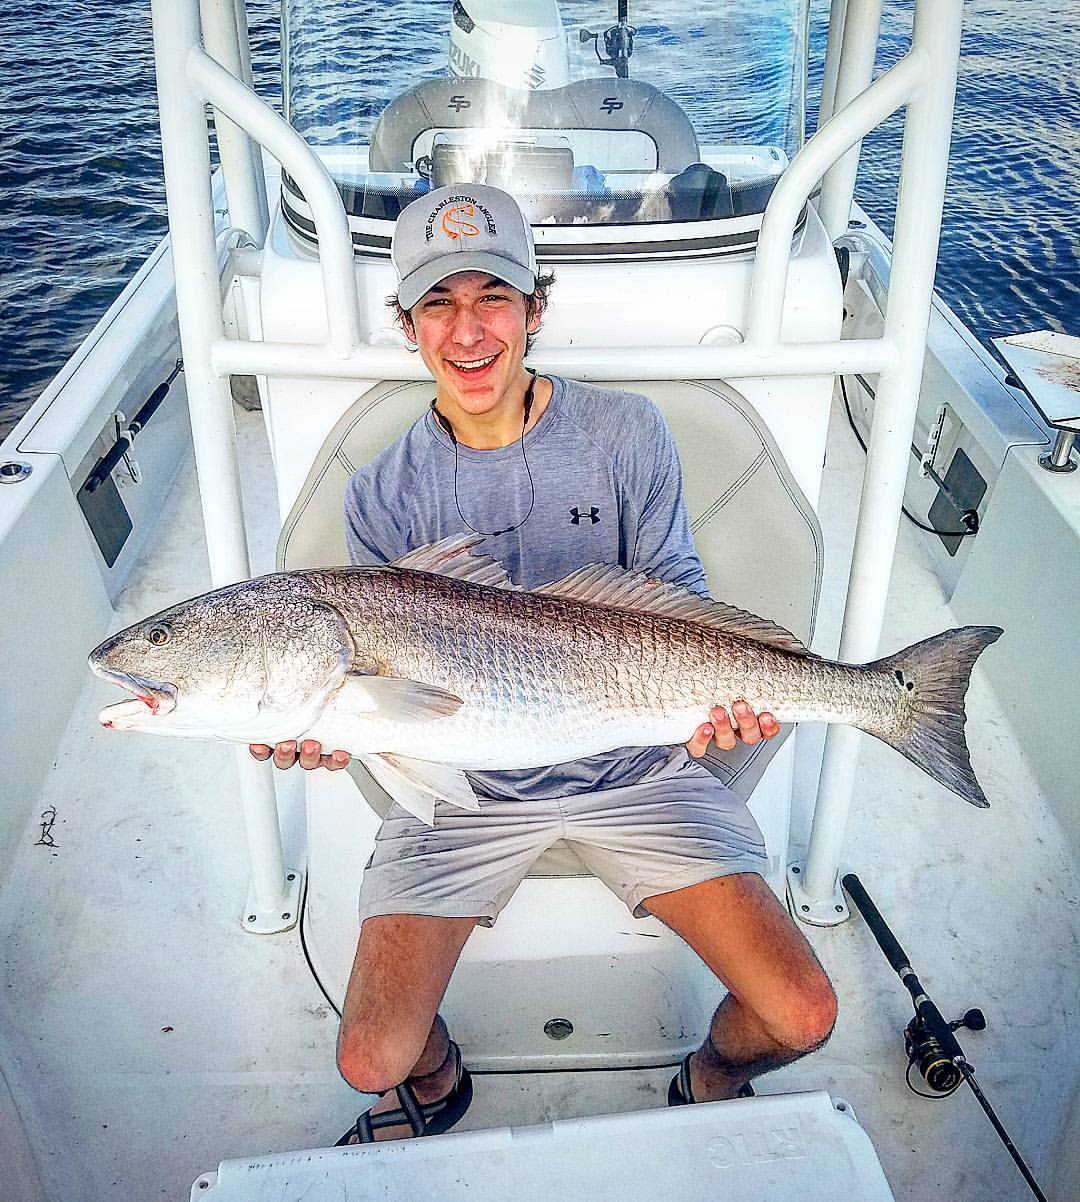 How Many Names Does A Red Drum Go By? – All in One Fishing Charters